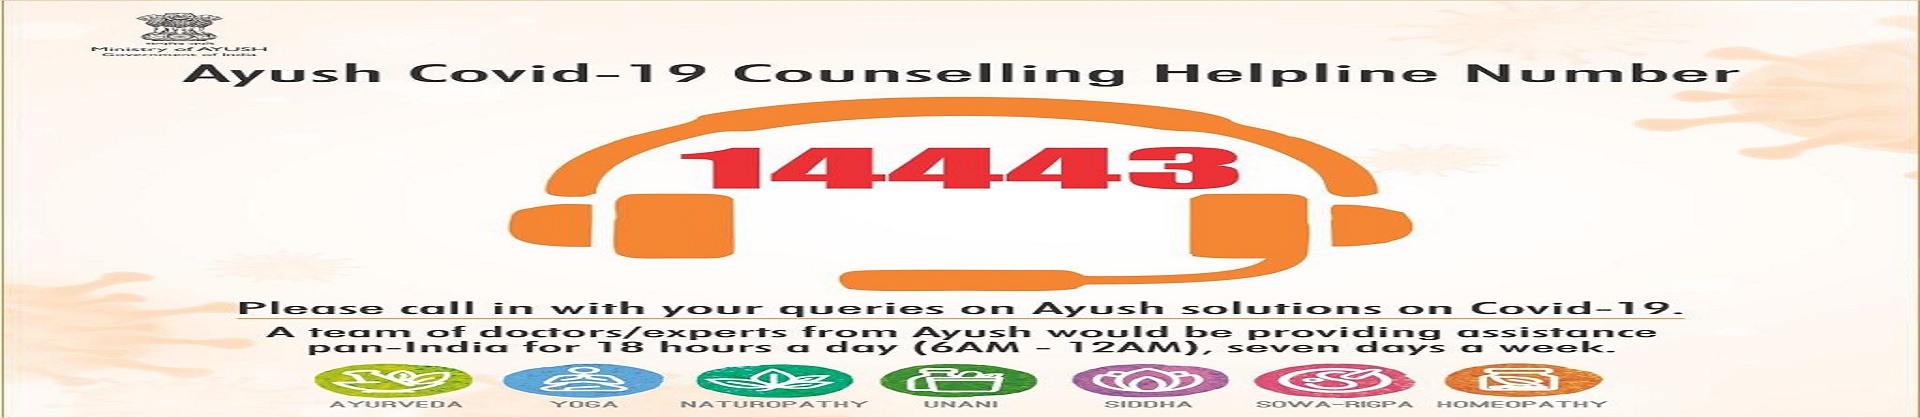 AYUSH Covid-19 Counselling Helpline Number.jpg